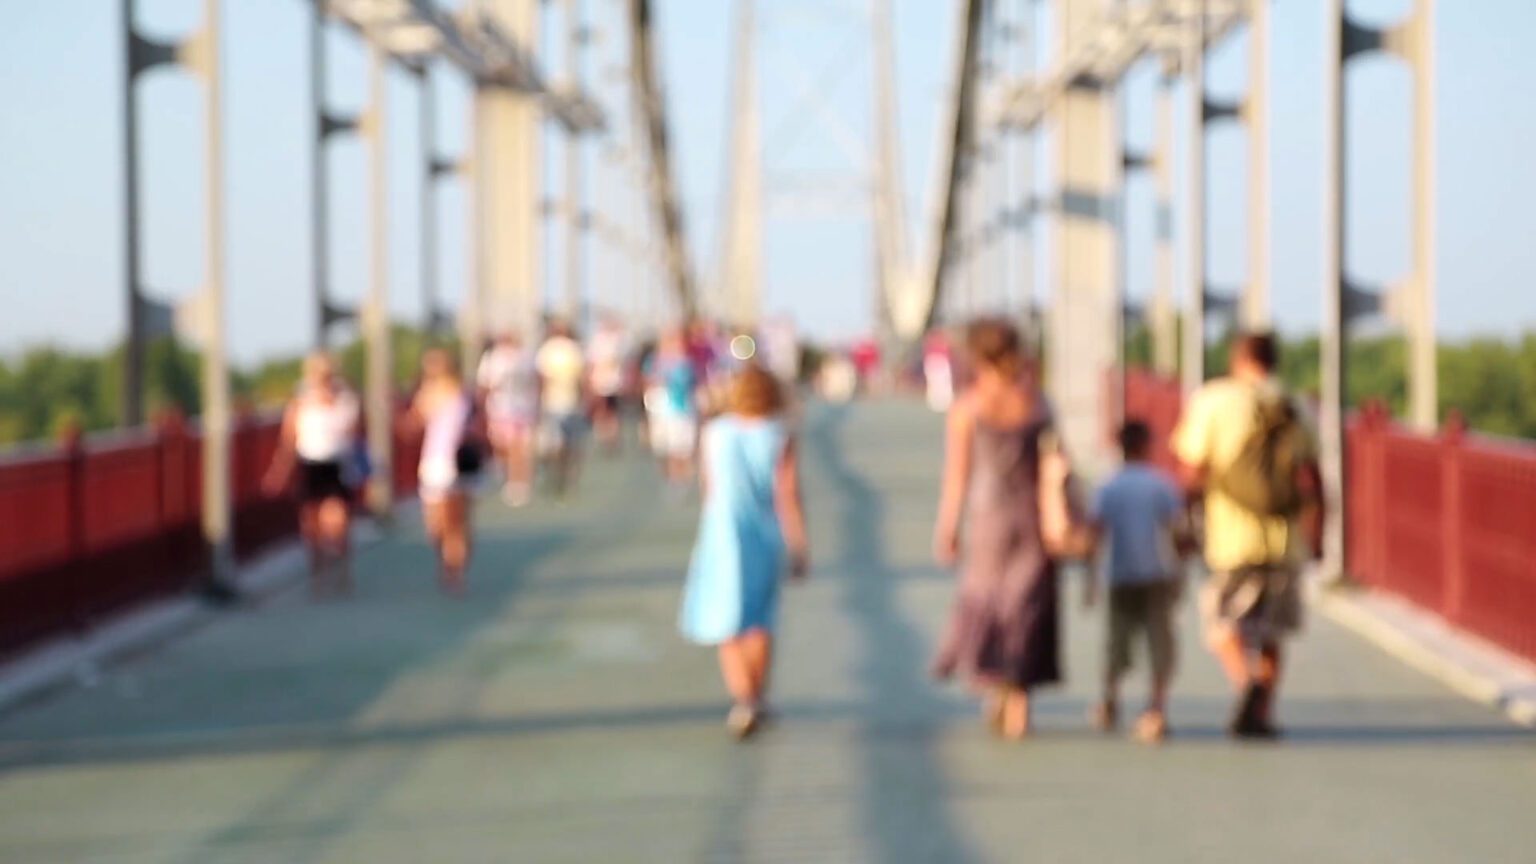 Learn how to add a blur effect to your video in premiere pro in just 4 simple steps - image of people walking across a bridge that is blurred